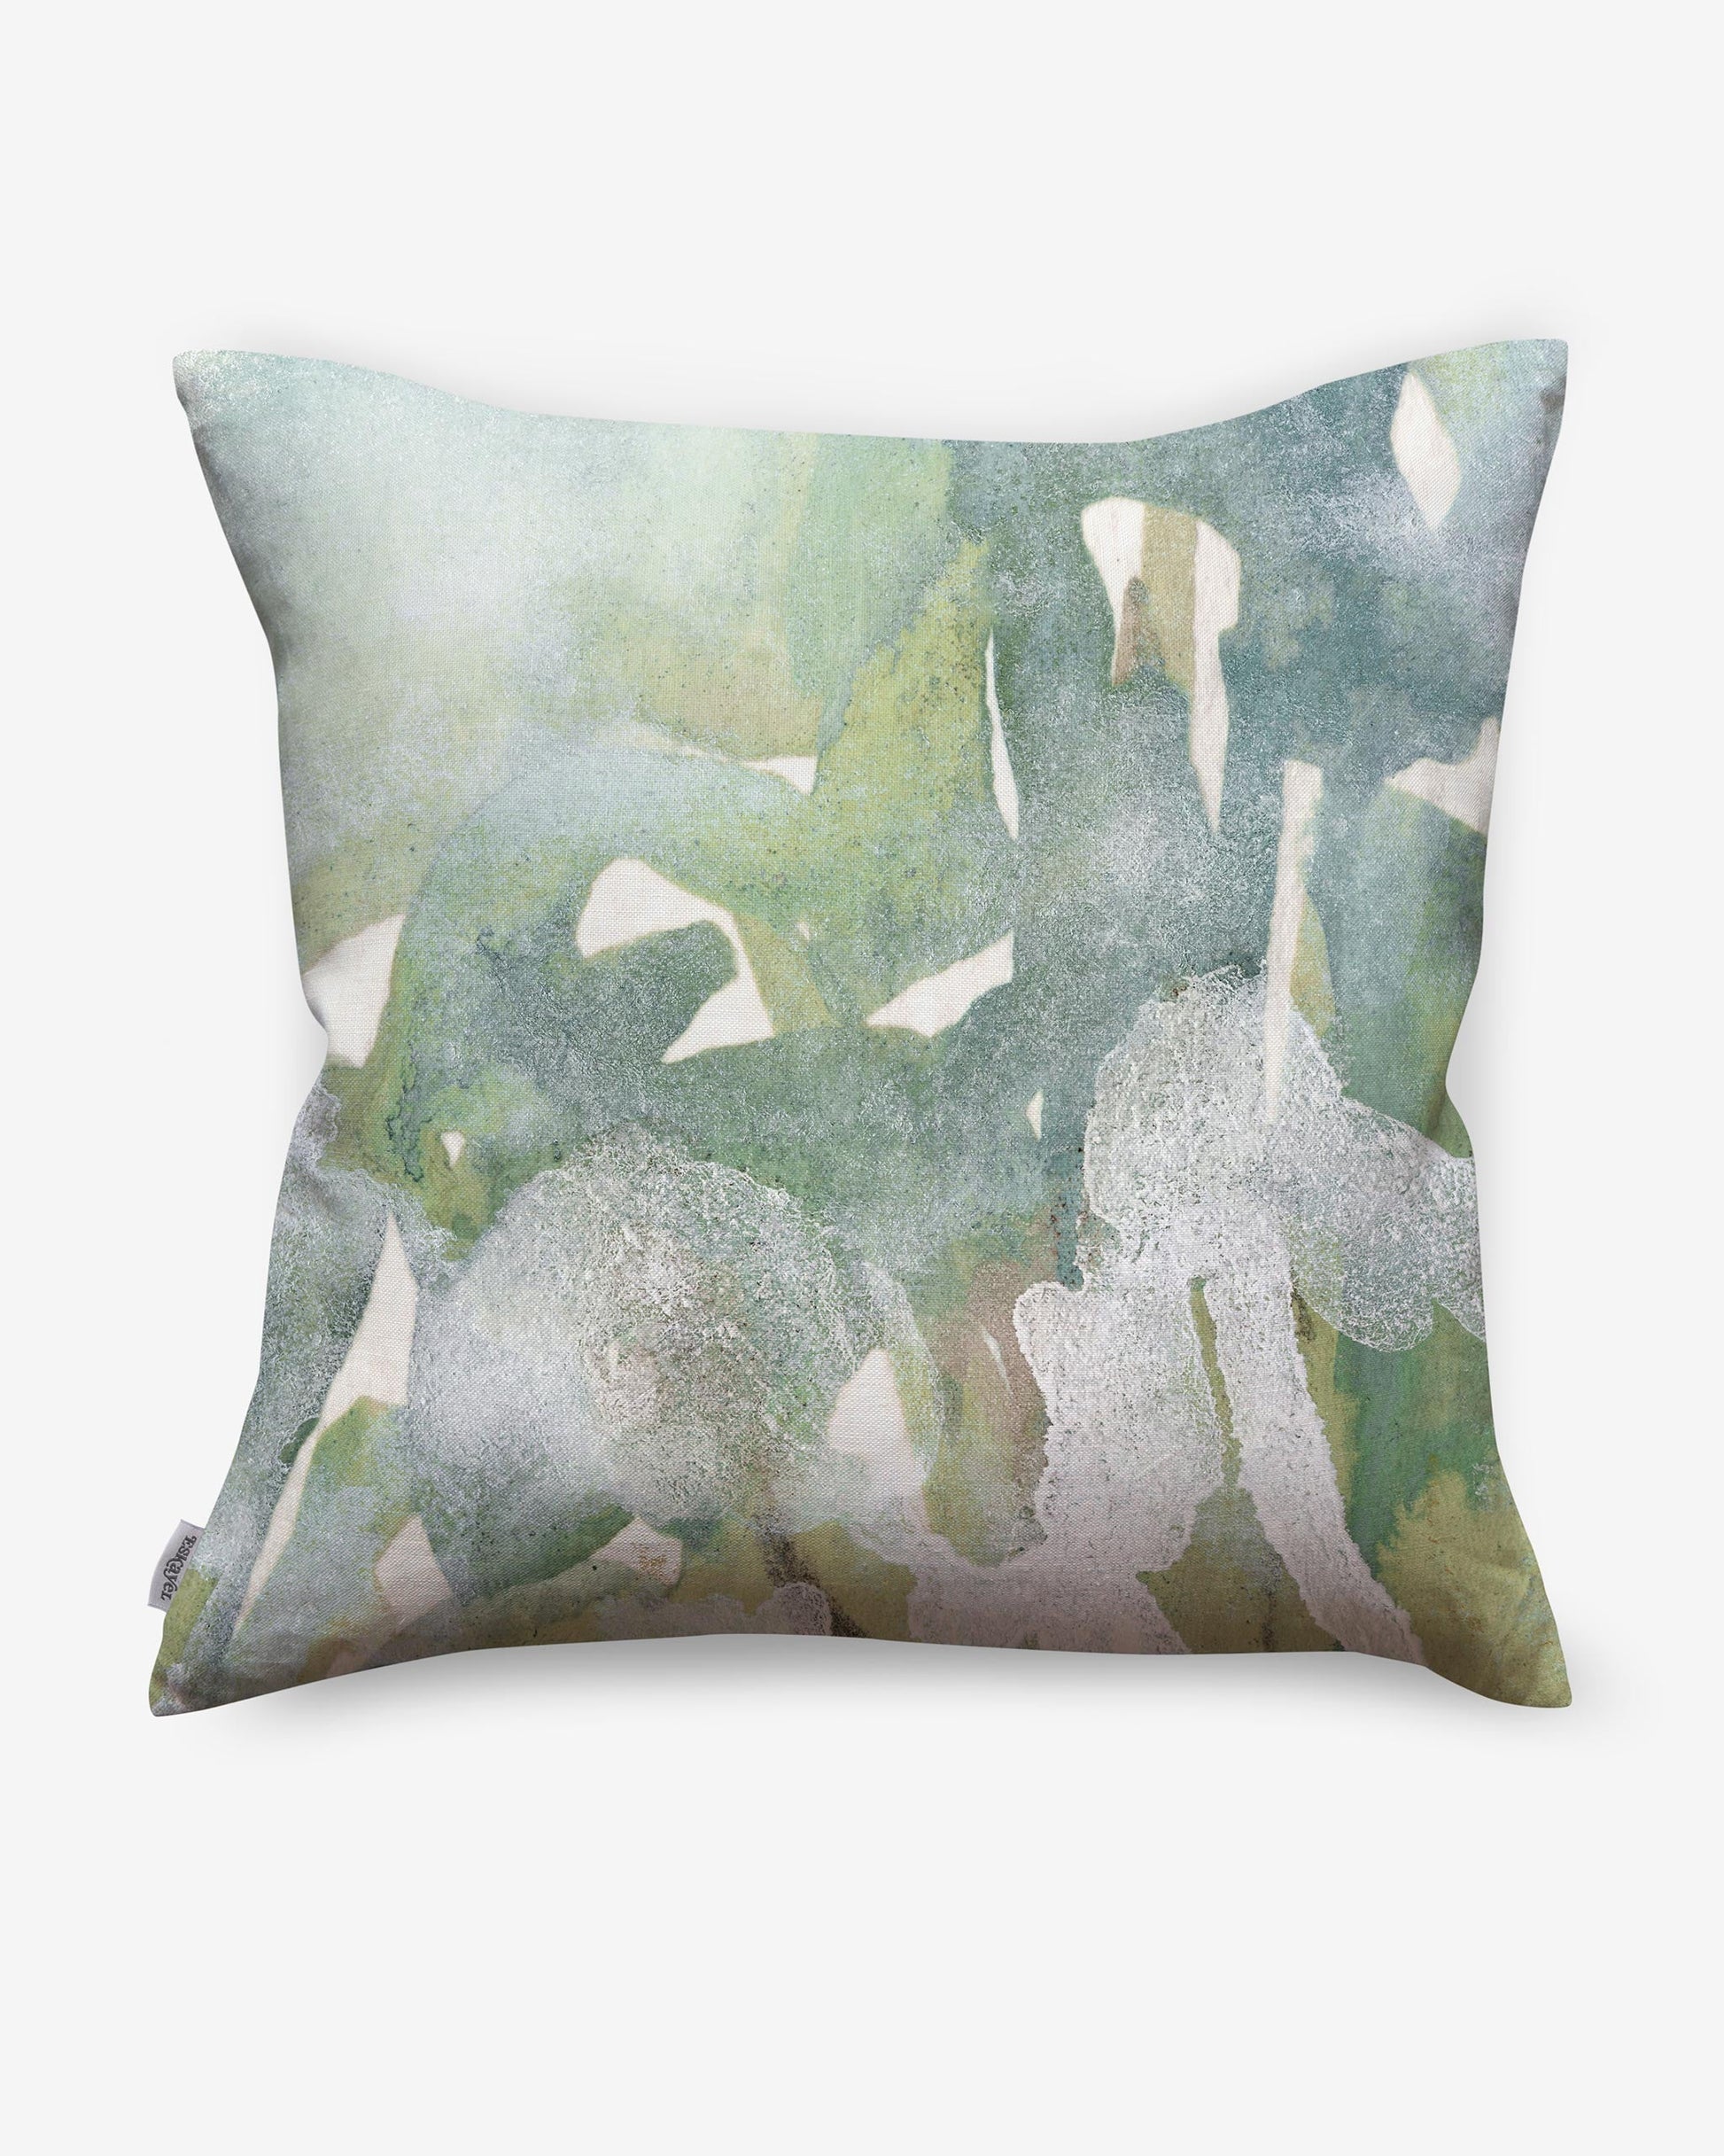 A cushion with a Regalo di Dio Pillow Verde painting on it